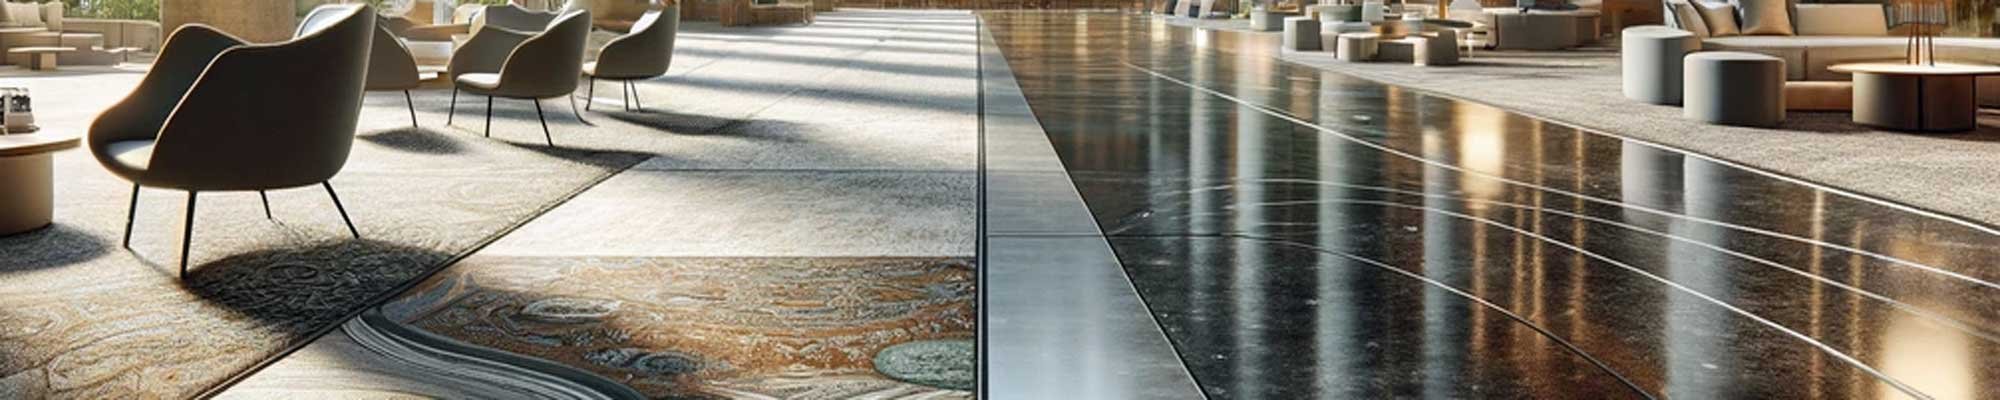 Flooring Products from Pro Flooring Solutions in Harrison